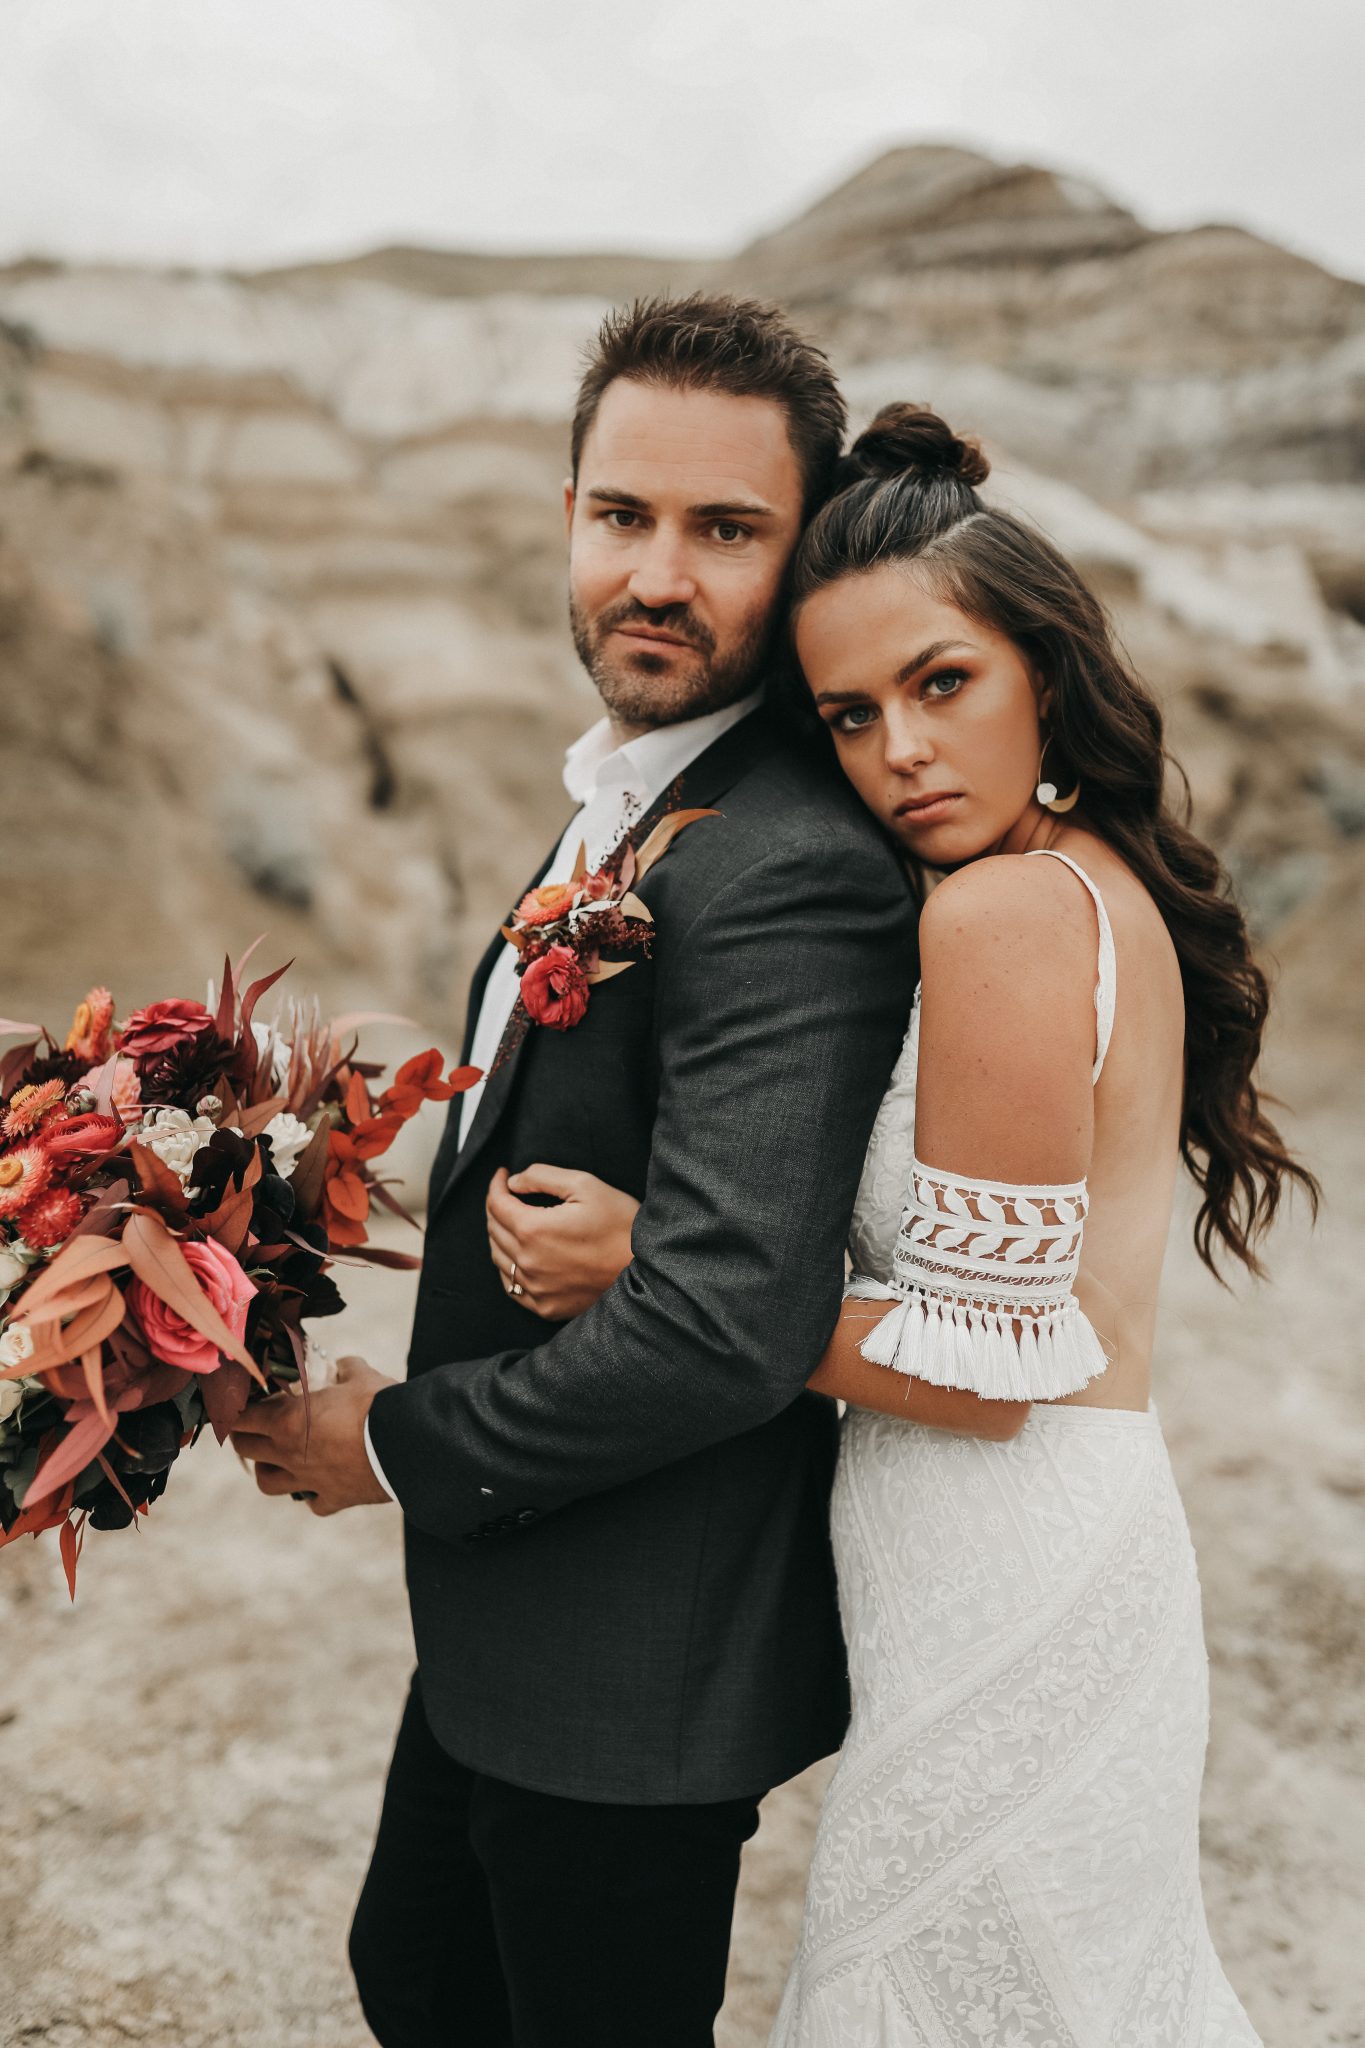 Bride and groom pose in Moroccan Elopement Inspiration attire featuring lace bridal cuffs and a grey suit